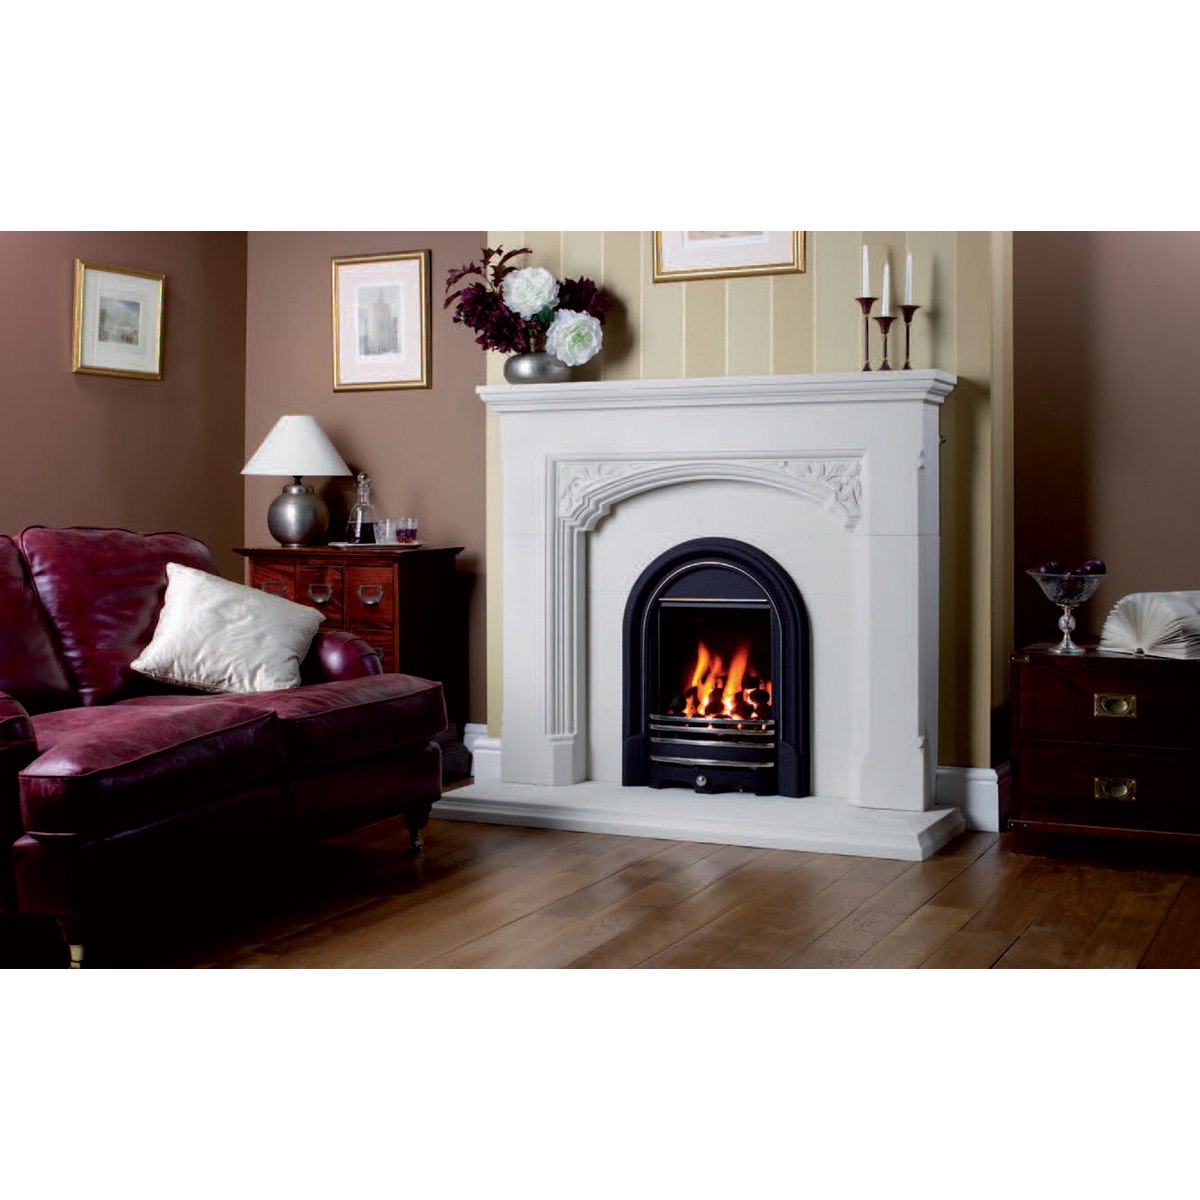 Best Product for Restoring a Cast Iron Fireplace